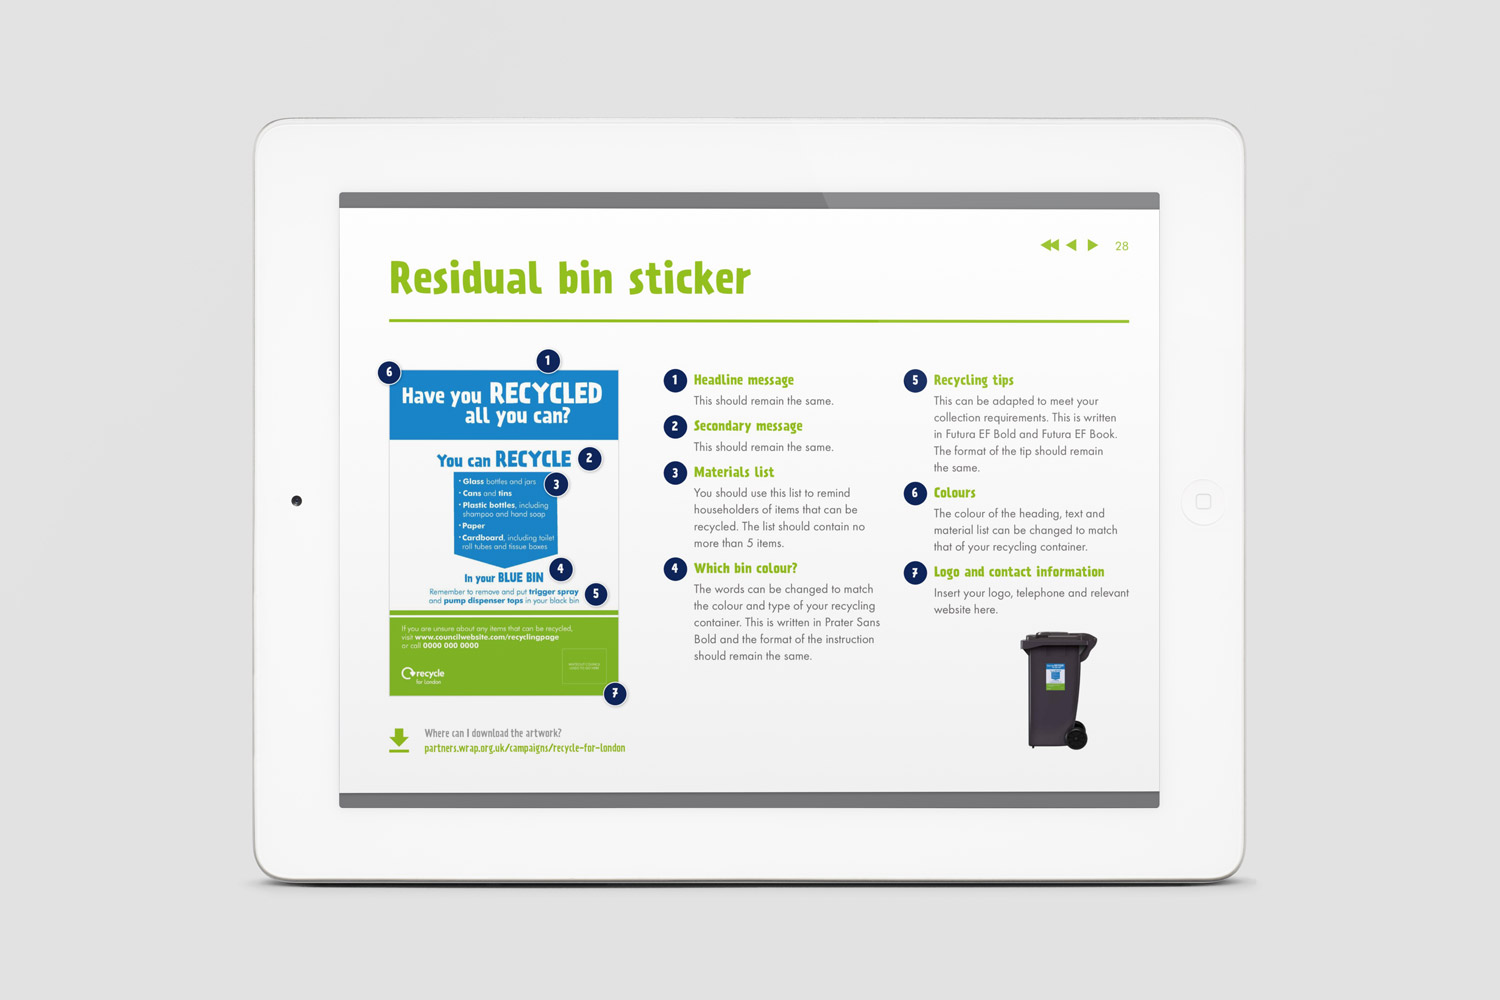 Recycle-for-London-Brand-Guidelines-bin-sticker-iPad-leaflet-by-Get-it-Sorted.jpg